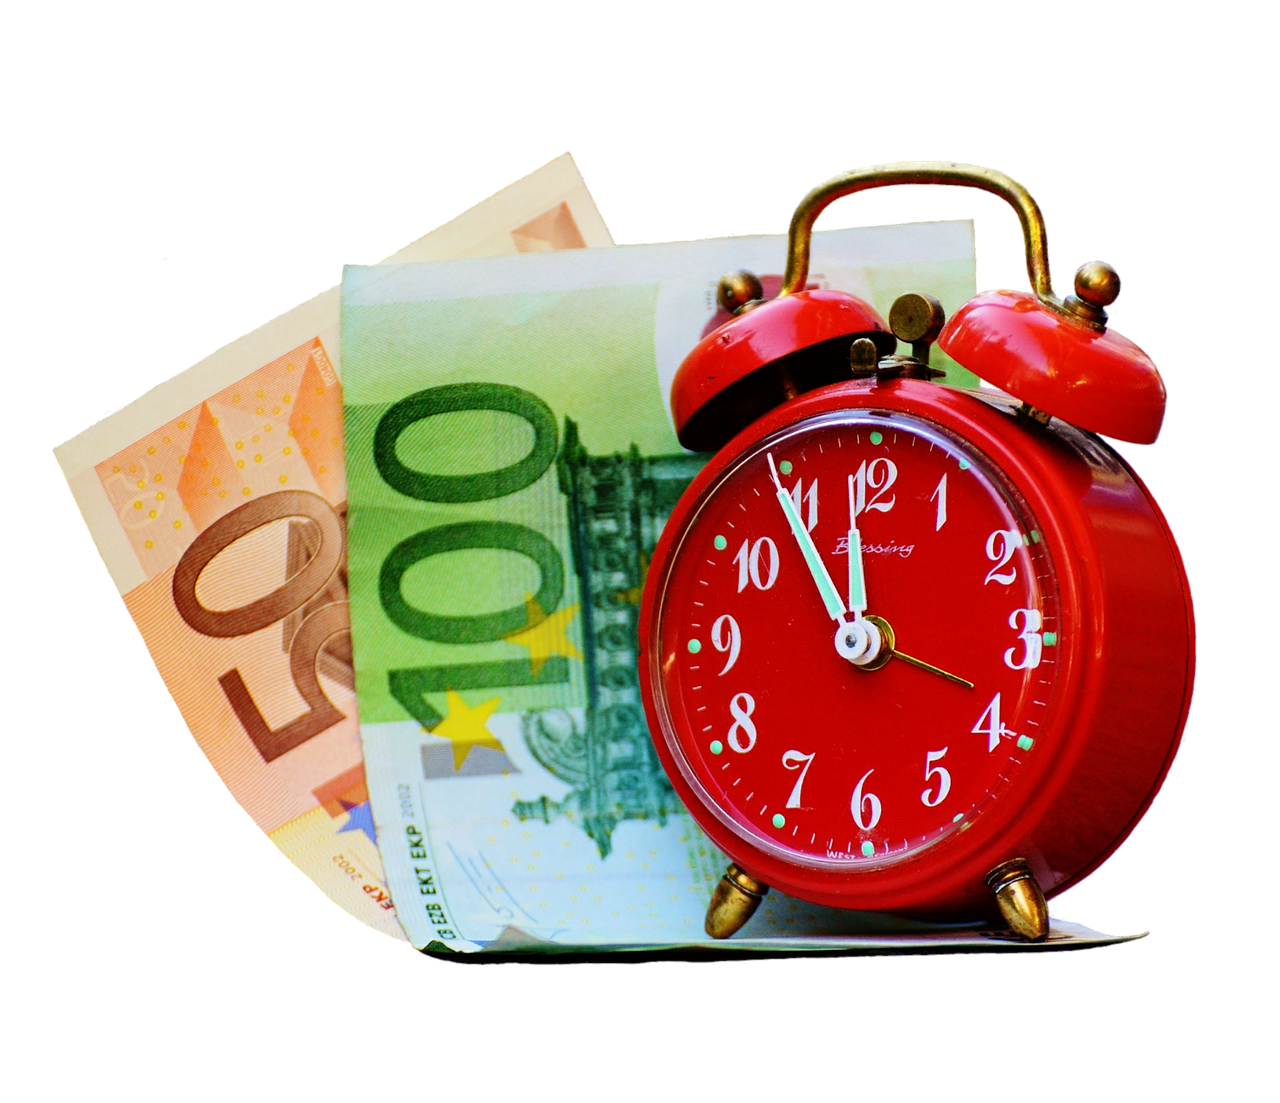 time is money the eleventh hour bank note free photo